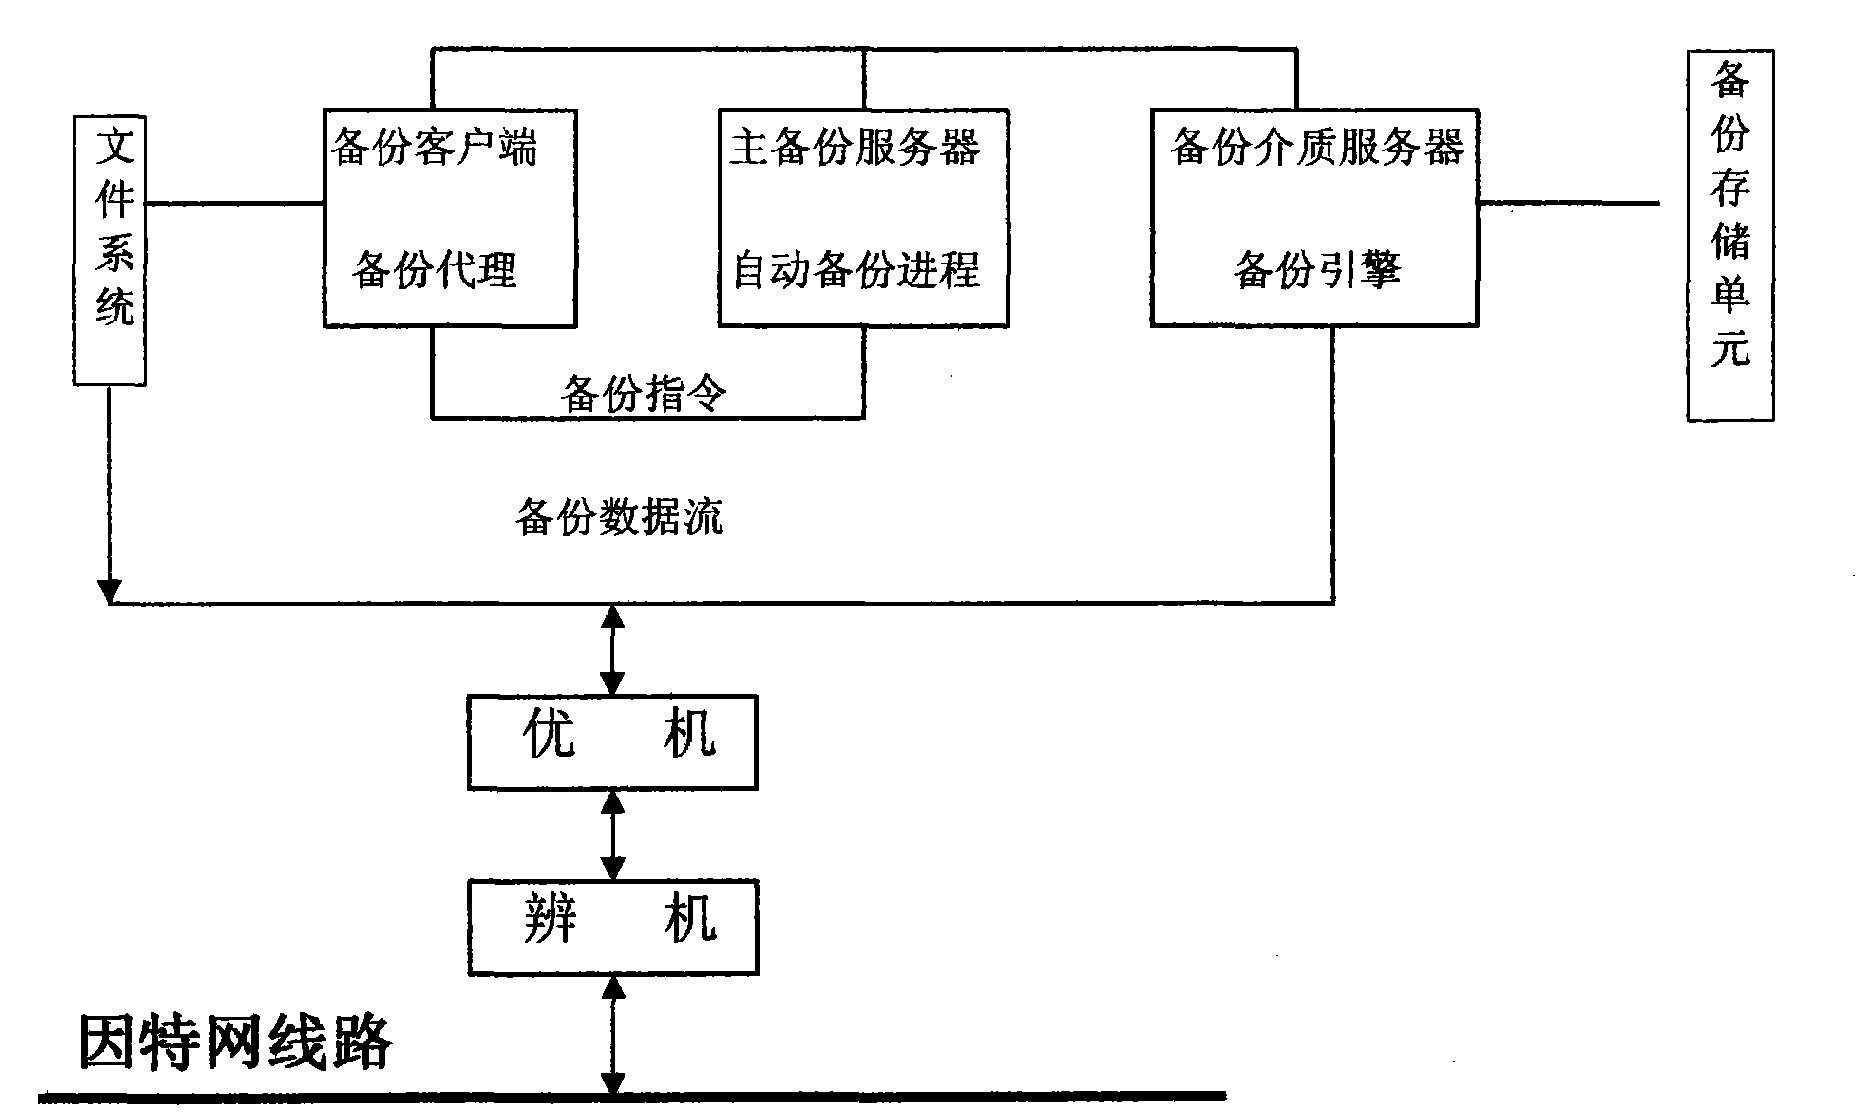 Control display and network system substituting integrated circuit card